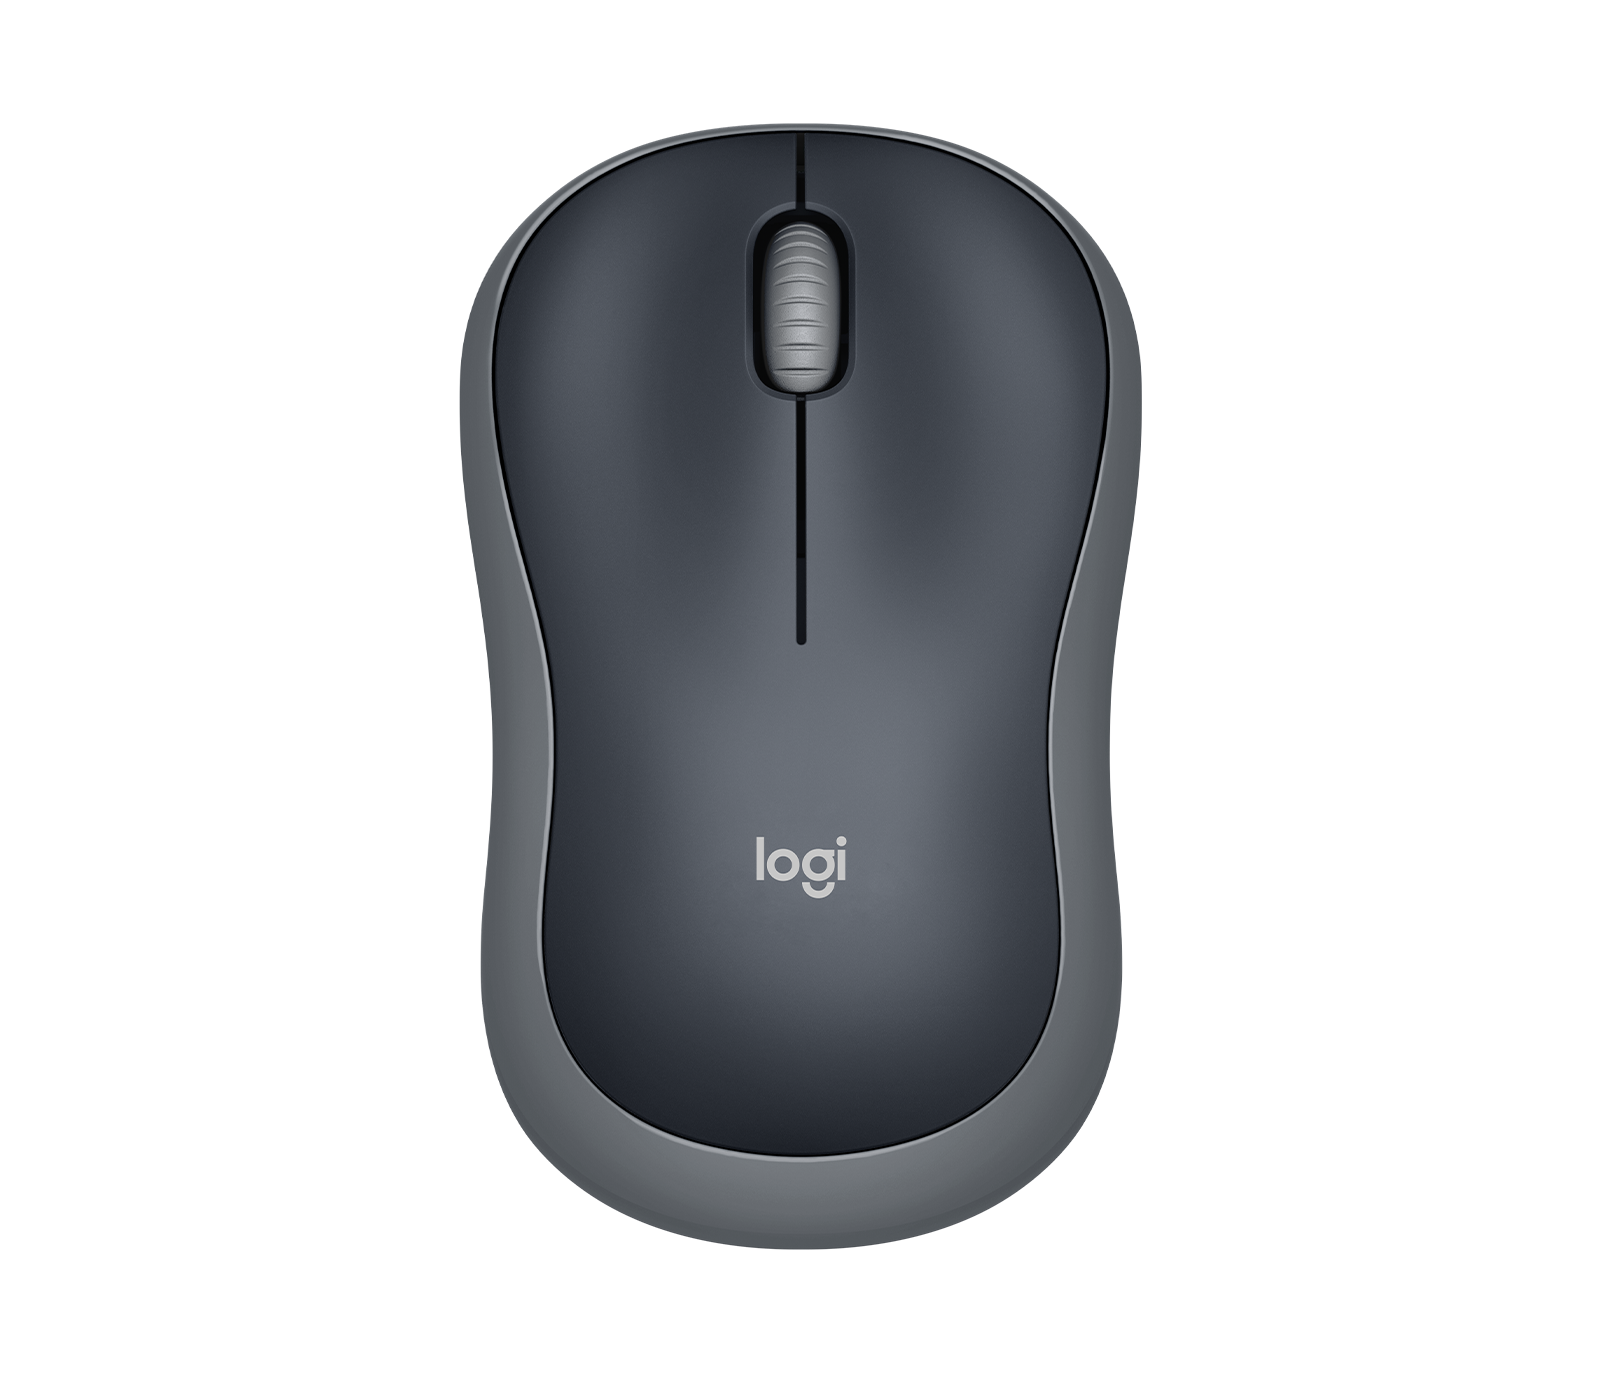 Logitech M185 Compact Wireless Mouse Designed for Laptops